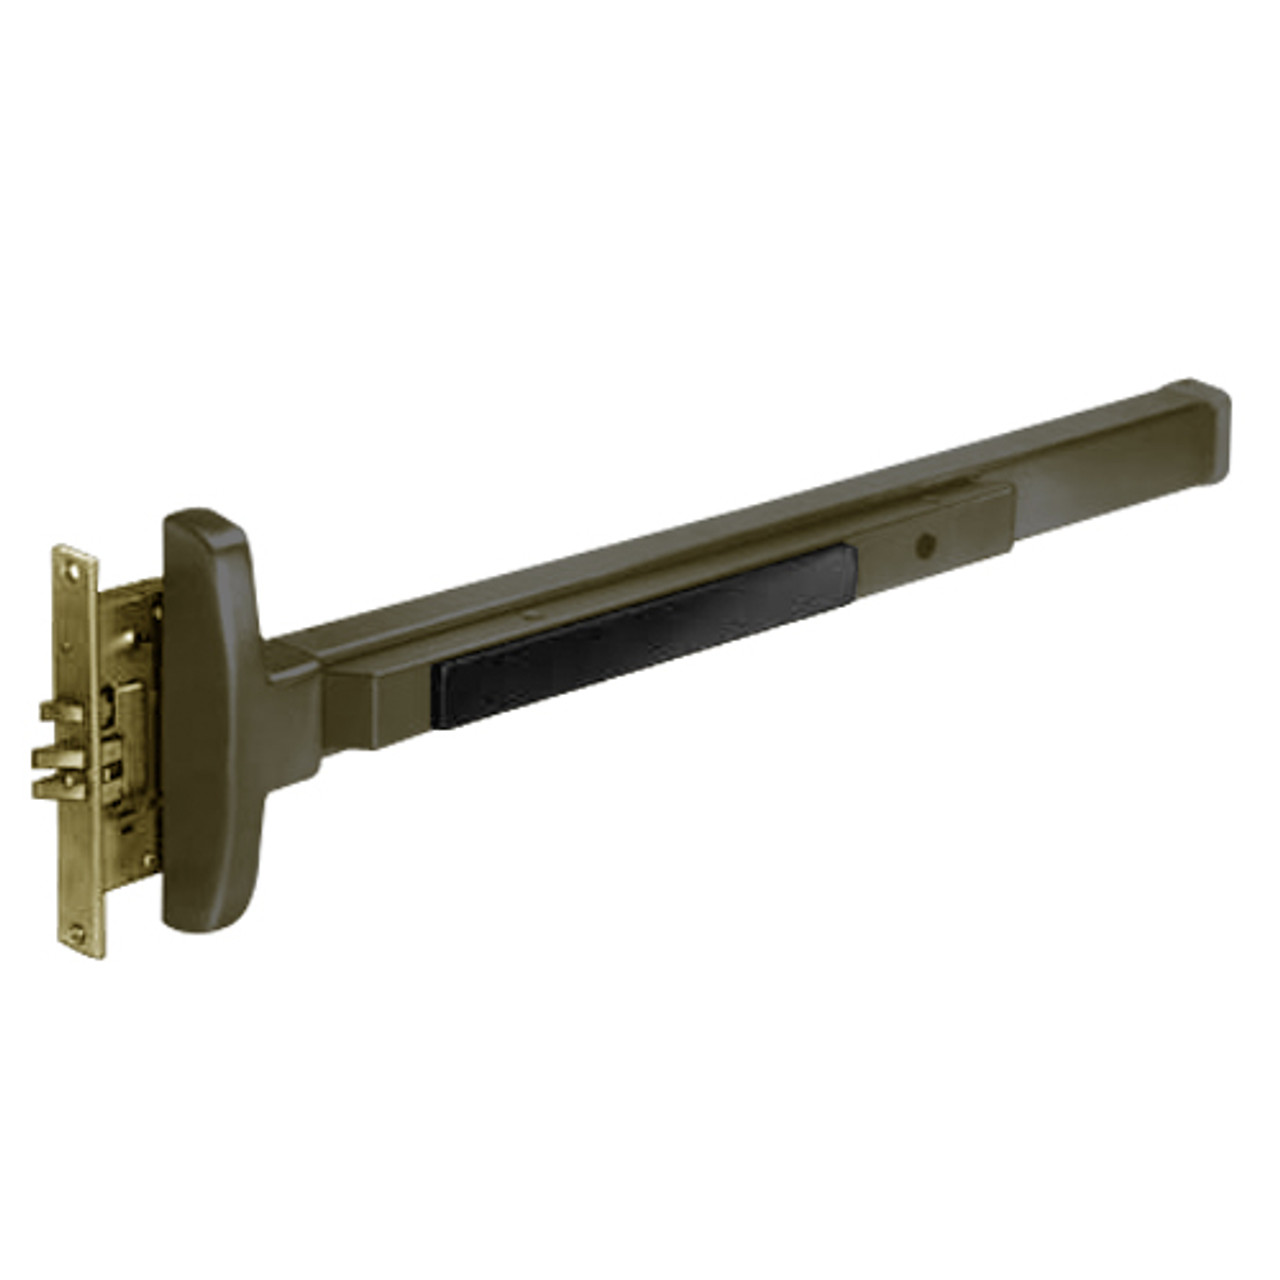 8310G-RHR-10B Sargent 80 Series Exit Only Narrow Stile Mortise Lock Exit Device in Oil Rubbed Bronze